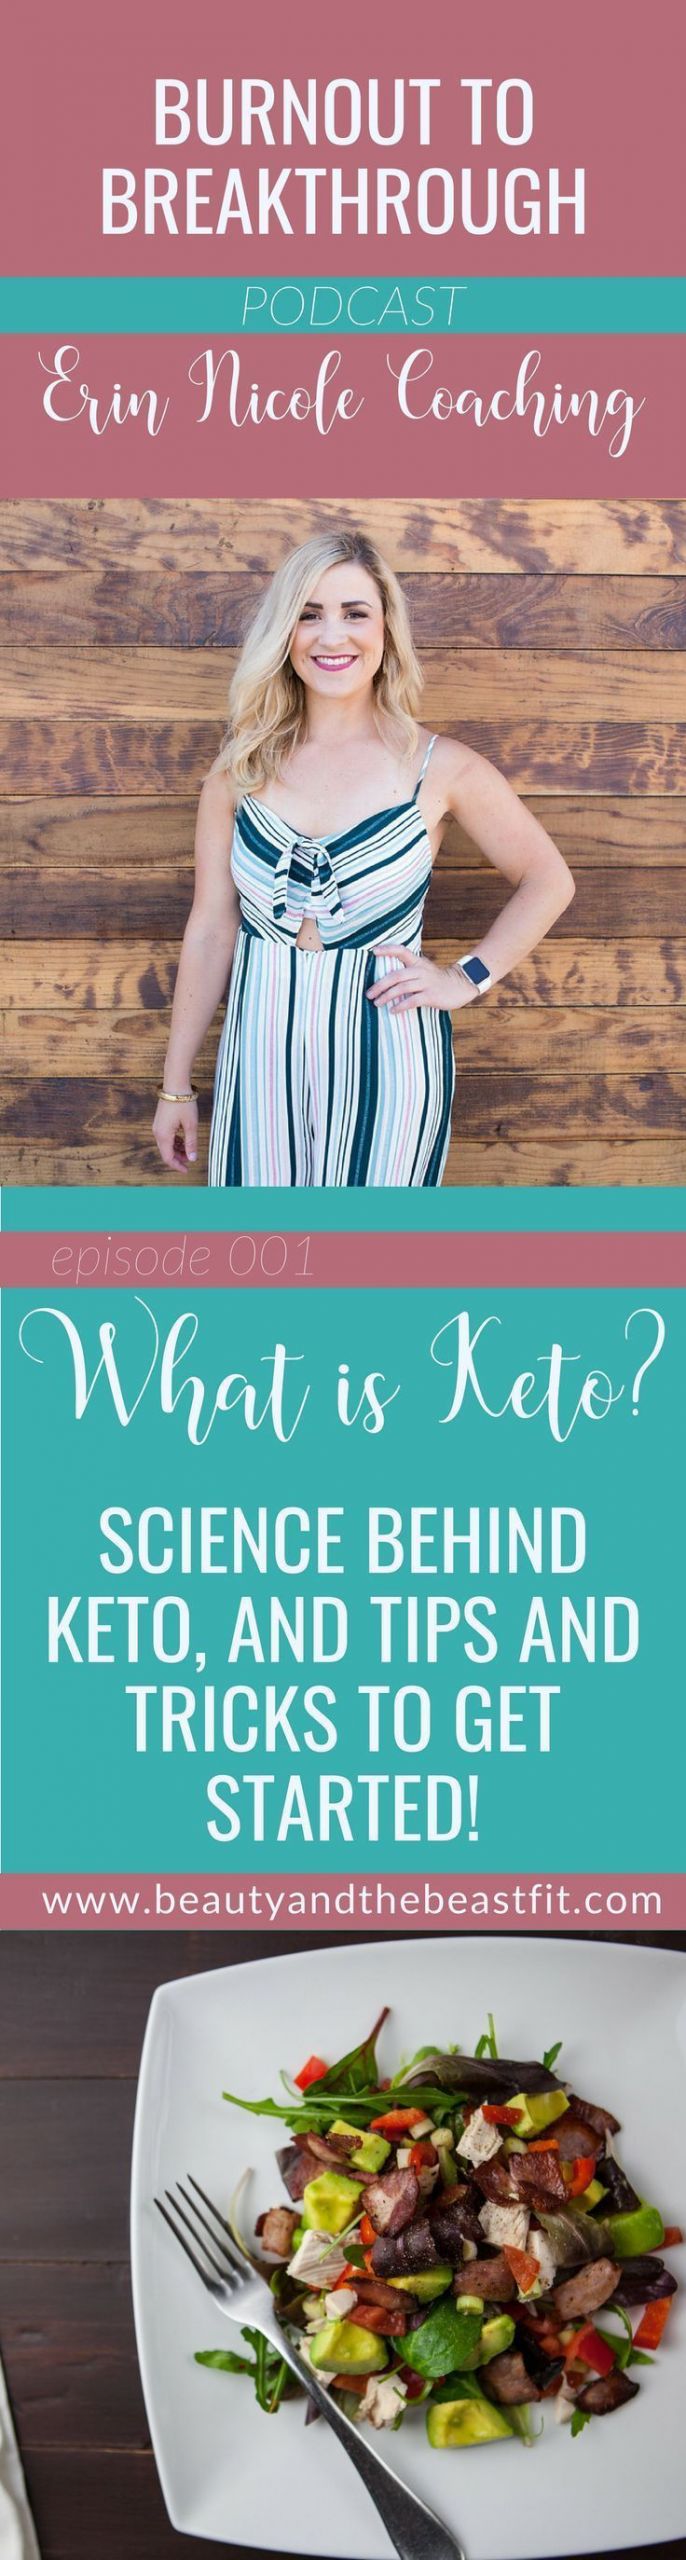 Science Behind Keto Diet
 What is Keto The science behind keto and tips and tricks